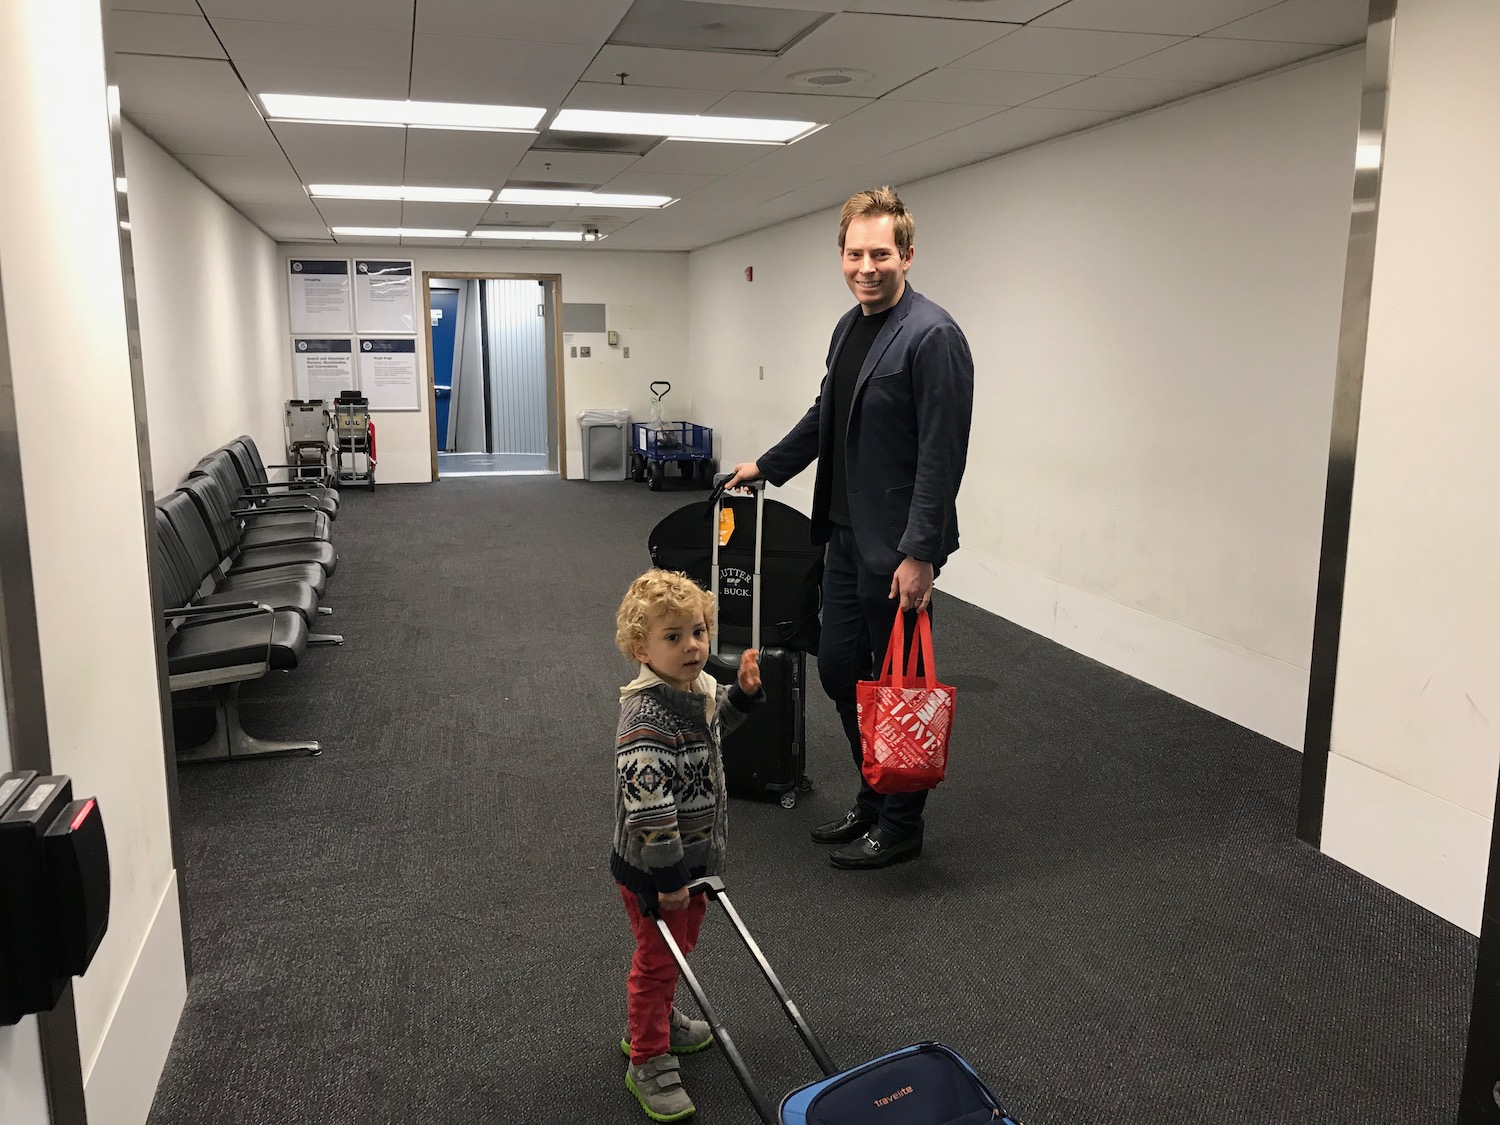 a man and child with luggage in an airport